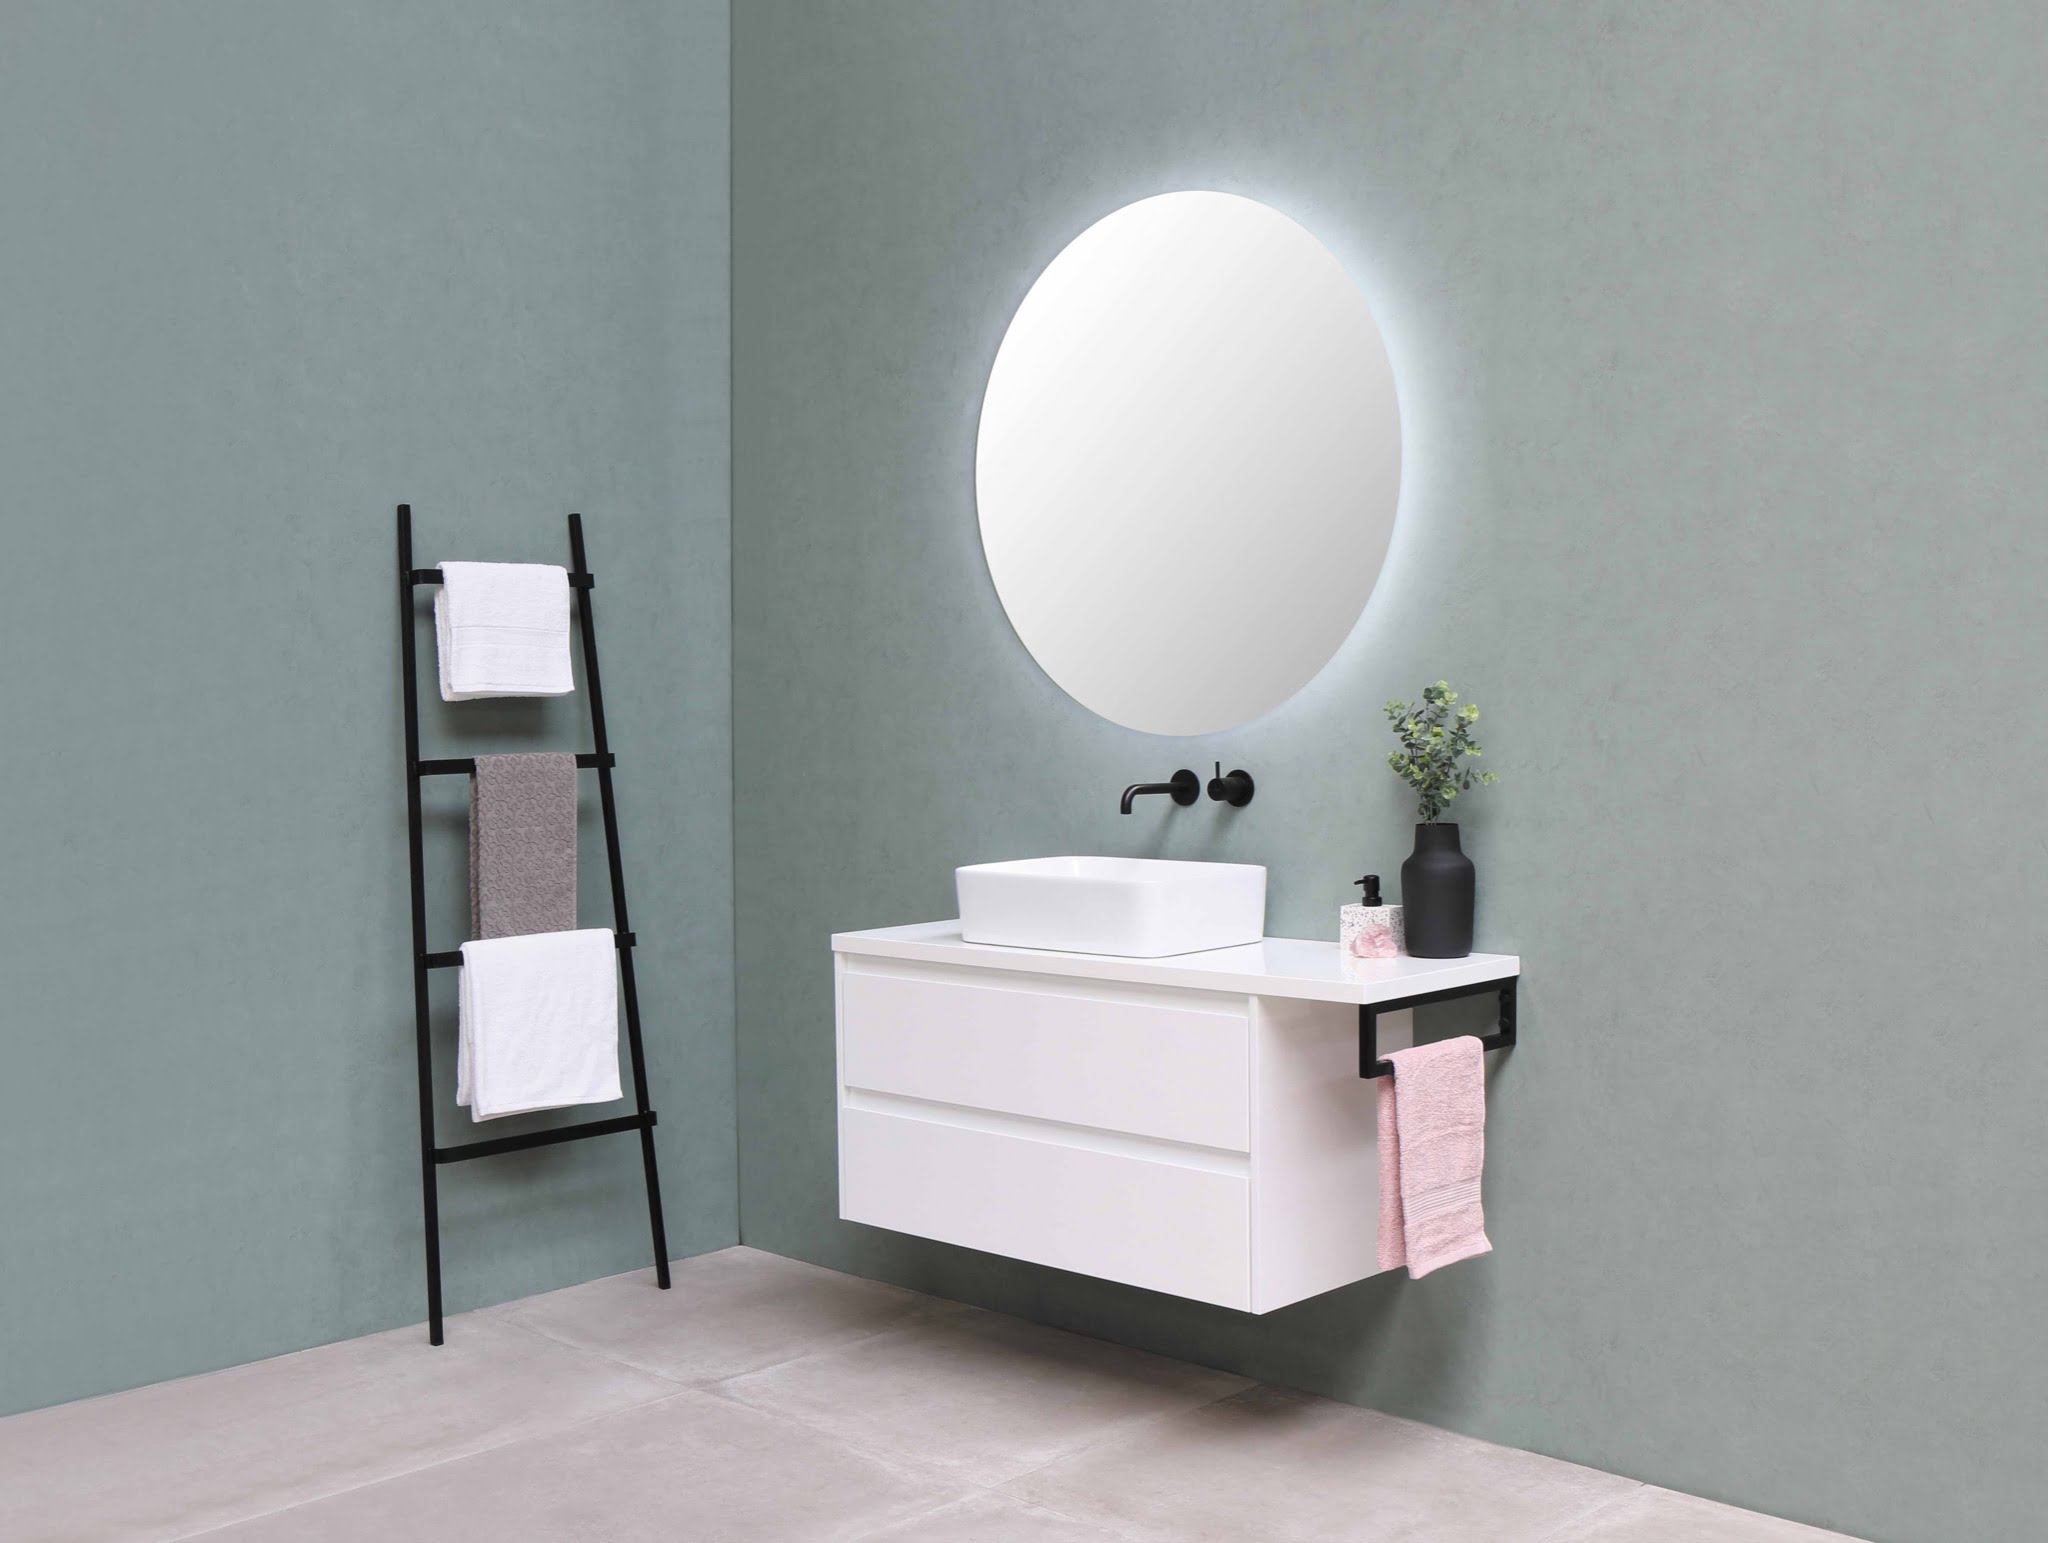 bathroom mirror and sink is one of simple design ideas for bathrooms